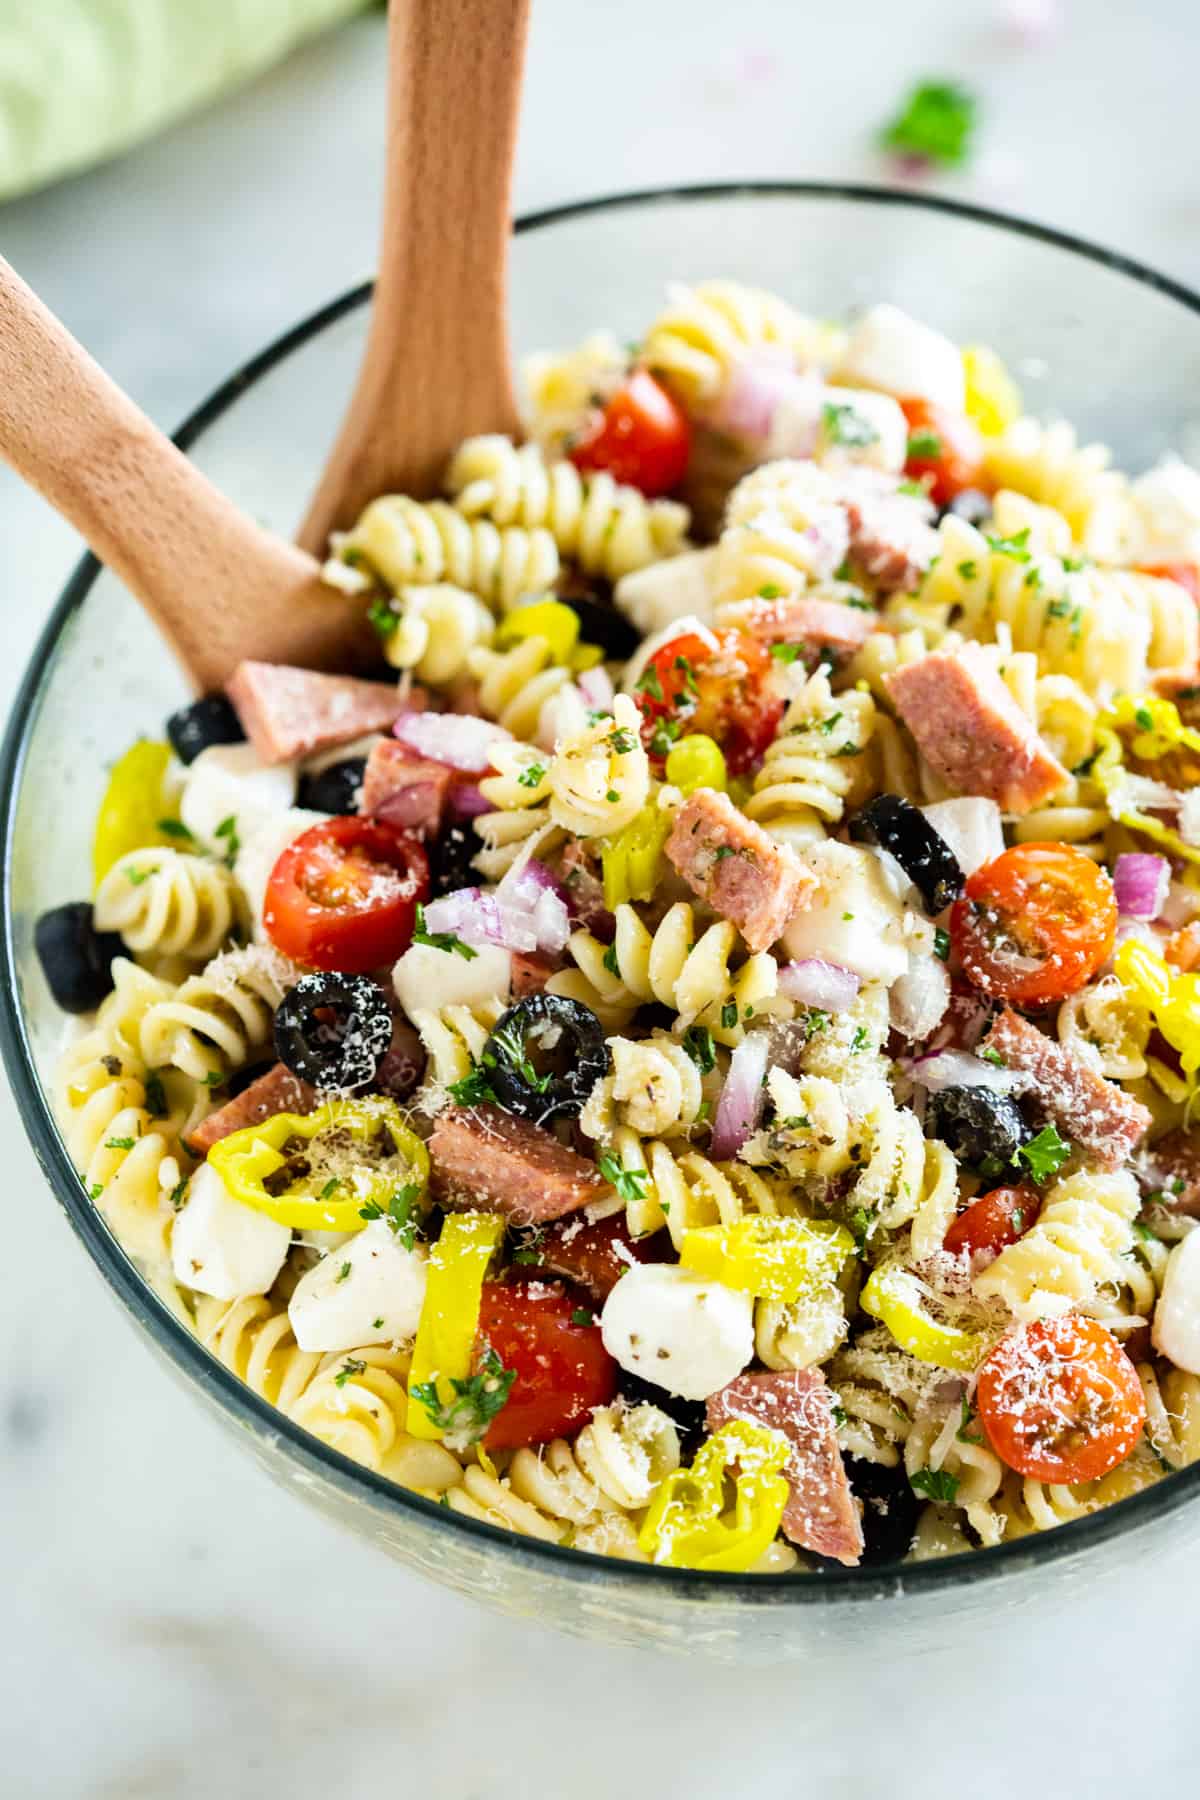 A close-up image of easy Italian Pasta Salad, ready to serve.